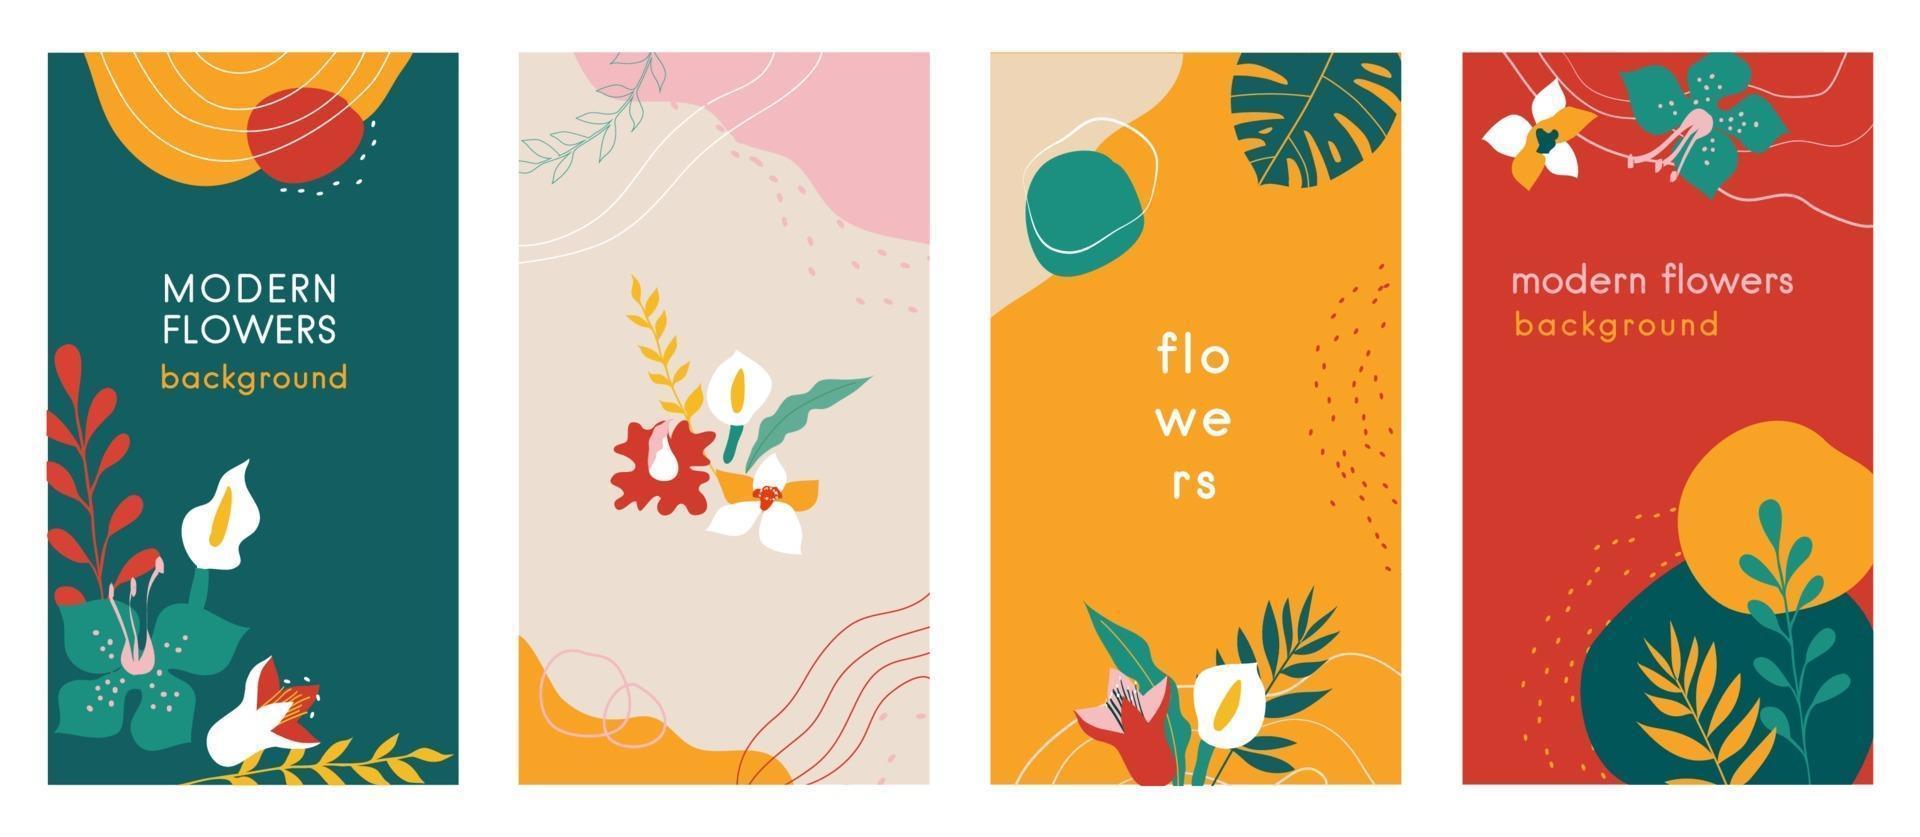 Abstract flowers Social media stories organic backgrounds set with modern color combinations, shapes, flowers and plants, monstera leaves, vertical format. vector